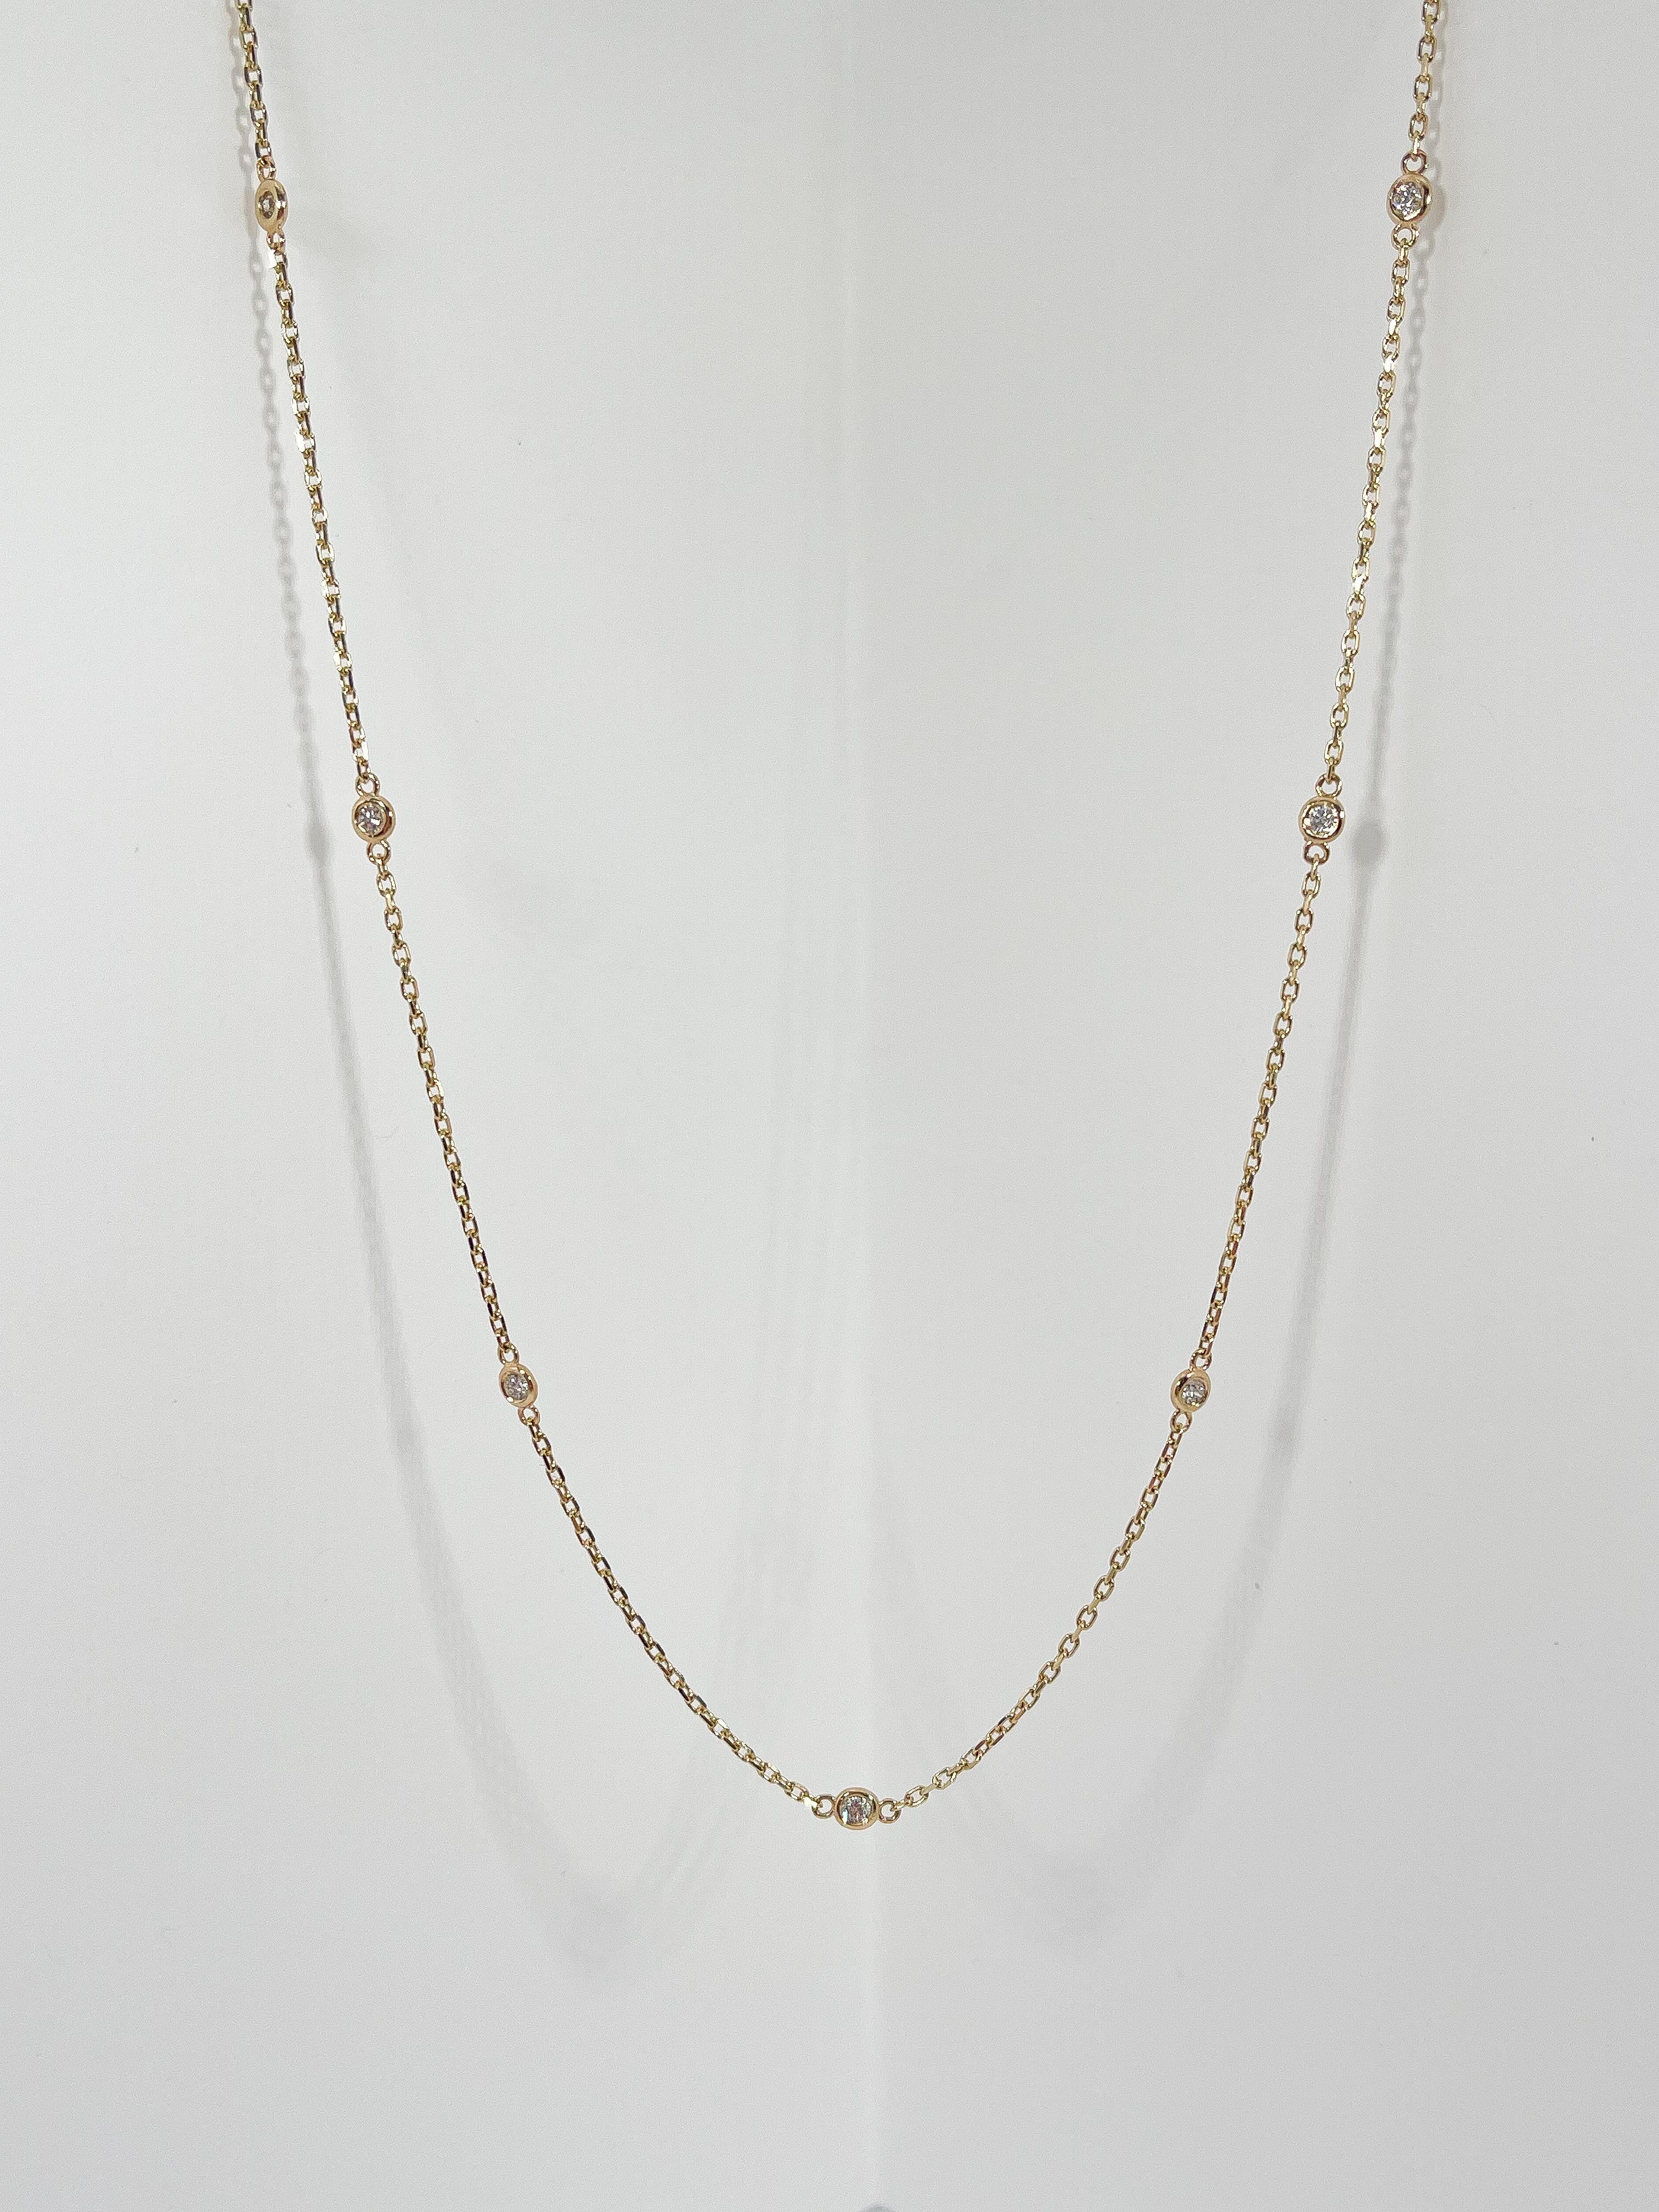 14k yellow gold diamond by the yard .30 CTW necklace. This necklace has 10 round diamond stations that have a diameter of 2.8 mm, the length is 18 inches, and it has a total weight of 3 grams.